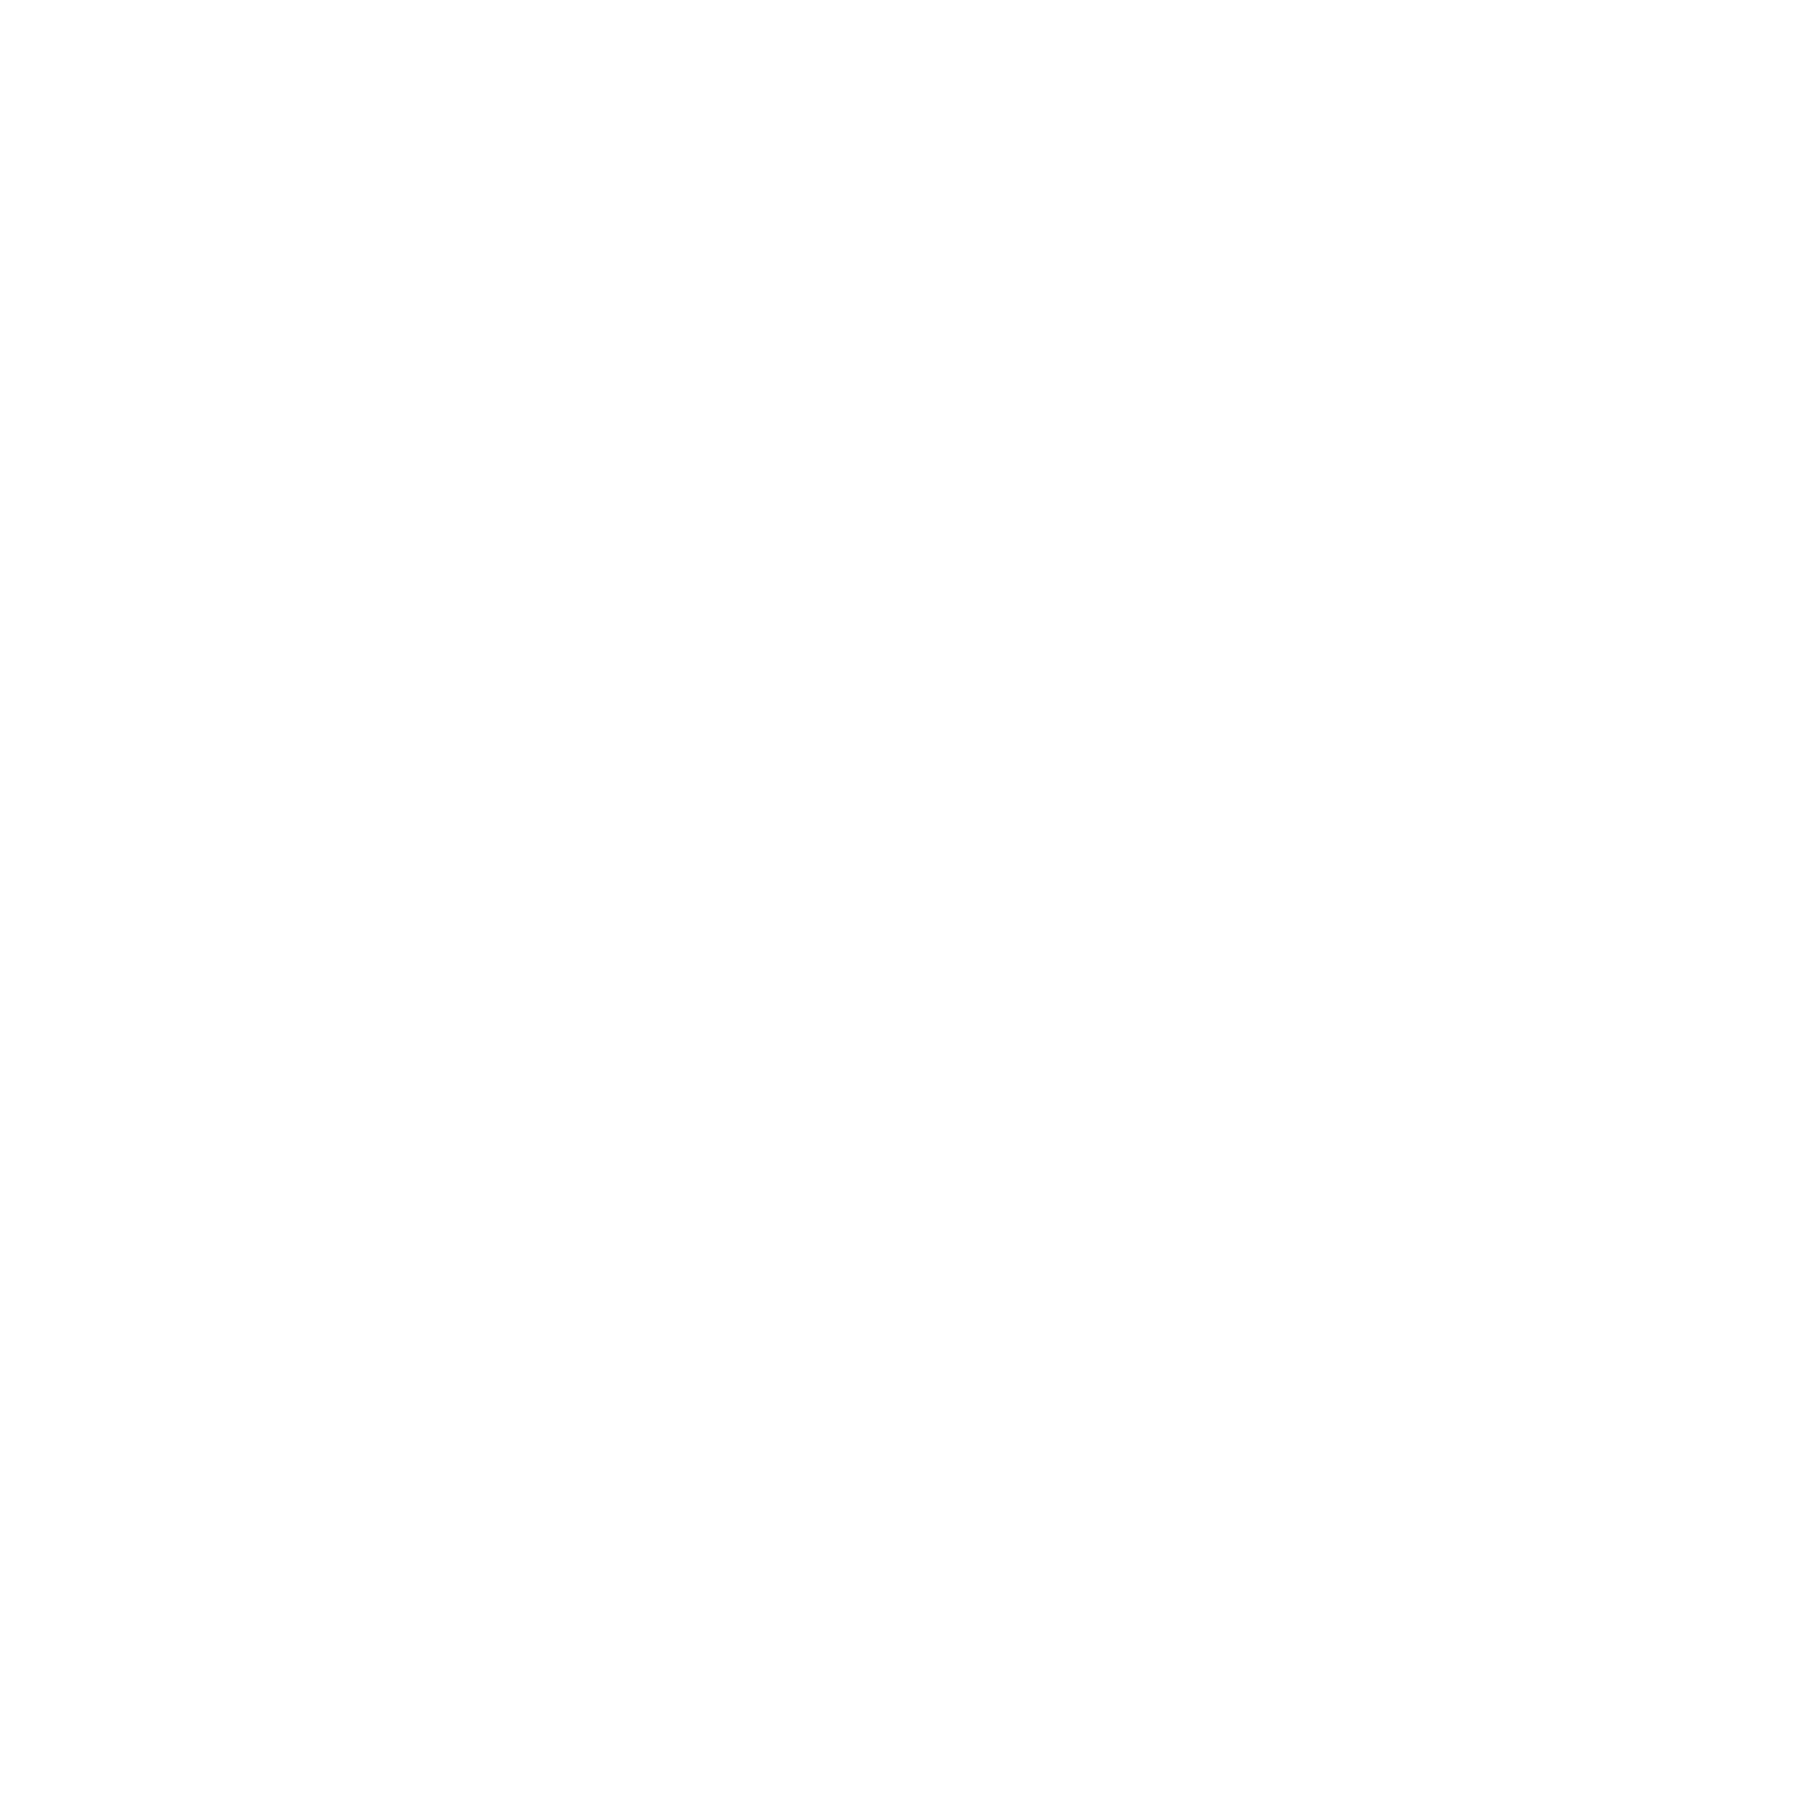 Data for Policy